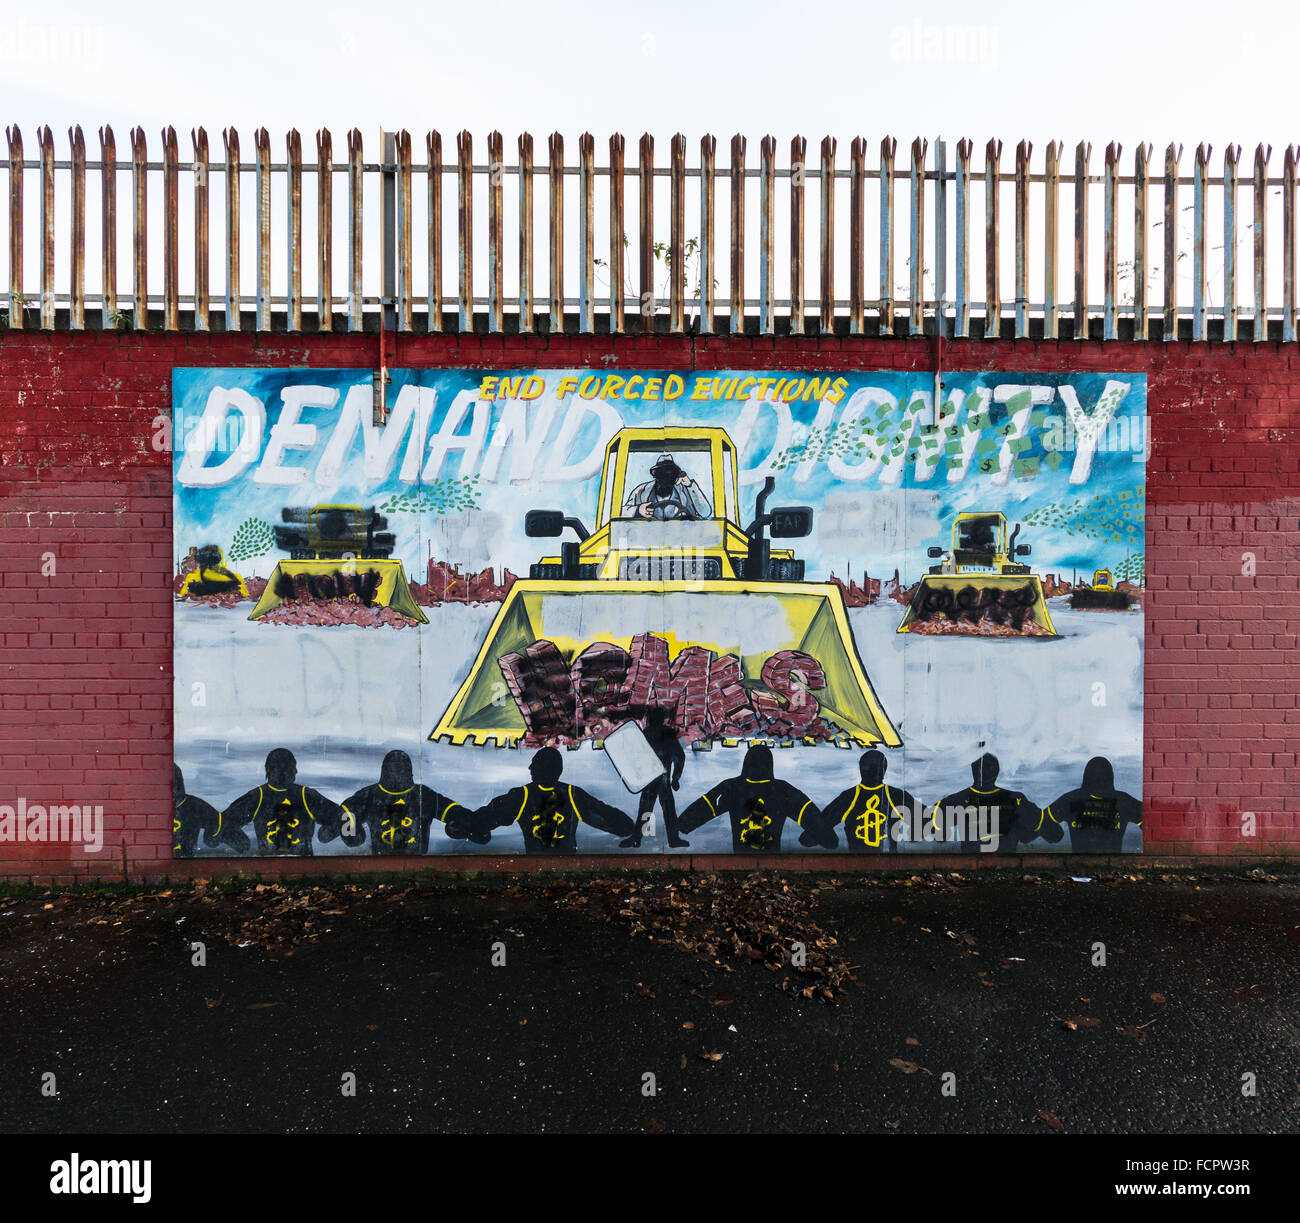 End the forced evictions, demand dignity mural near Shankill Road area of Belfast. Stock Photo